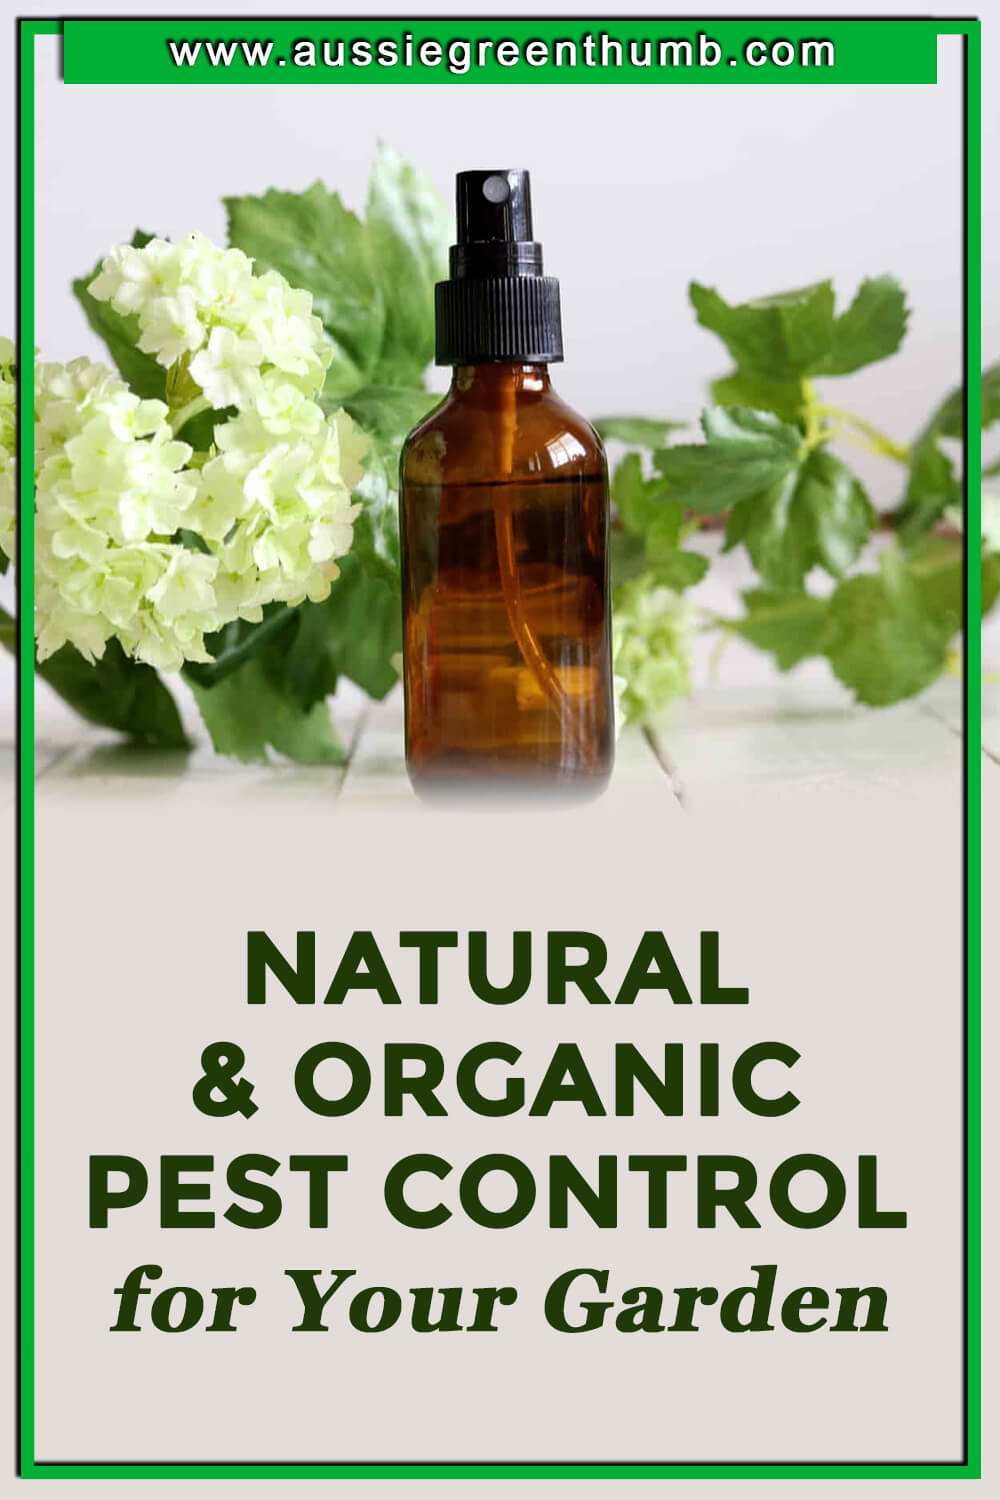 Best Natural and Organic Pest Control for Your Garden